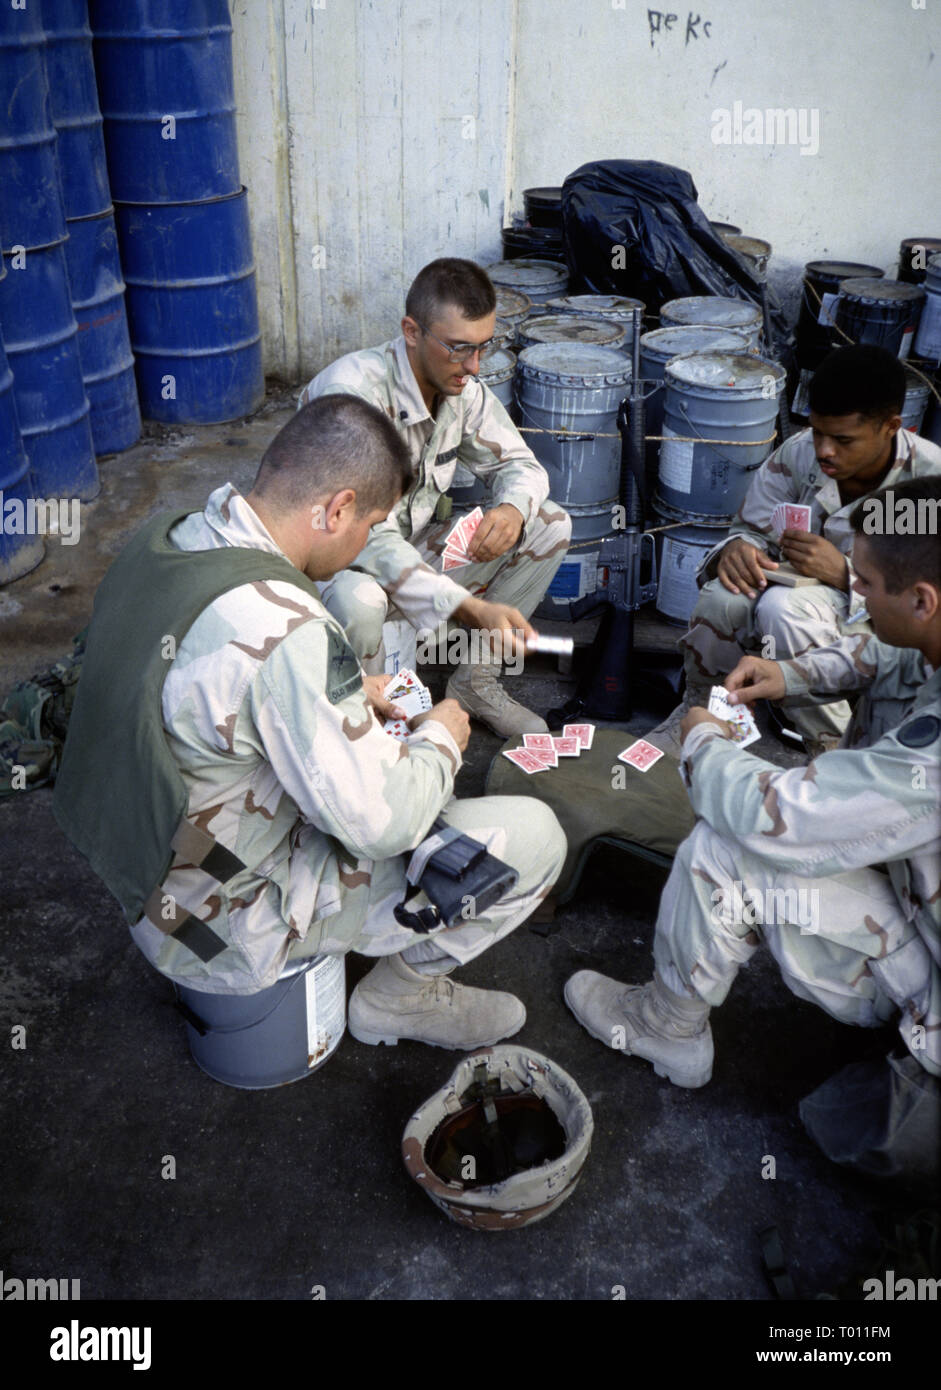 29th October 1993 U.S. Army soldiers of the 1st Armored and 24th Infantry Divisions rest in the shade after having just arrived by ship in Mogadishu's new port in Somalia. Stock Photo